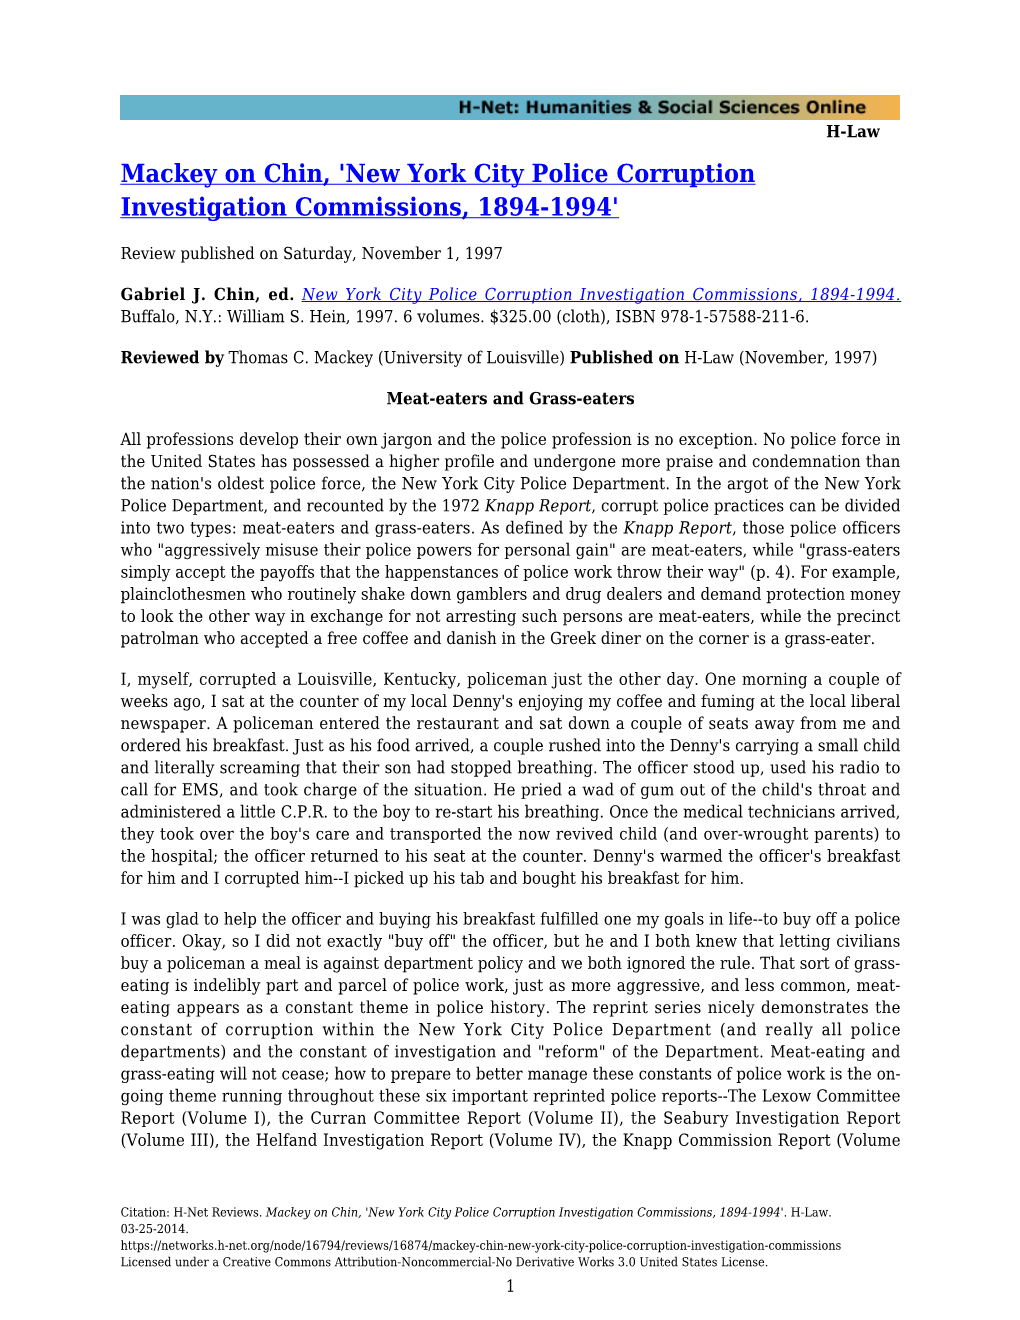 New York City Police Corruption Investigation Commissions, 1894-1994'